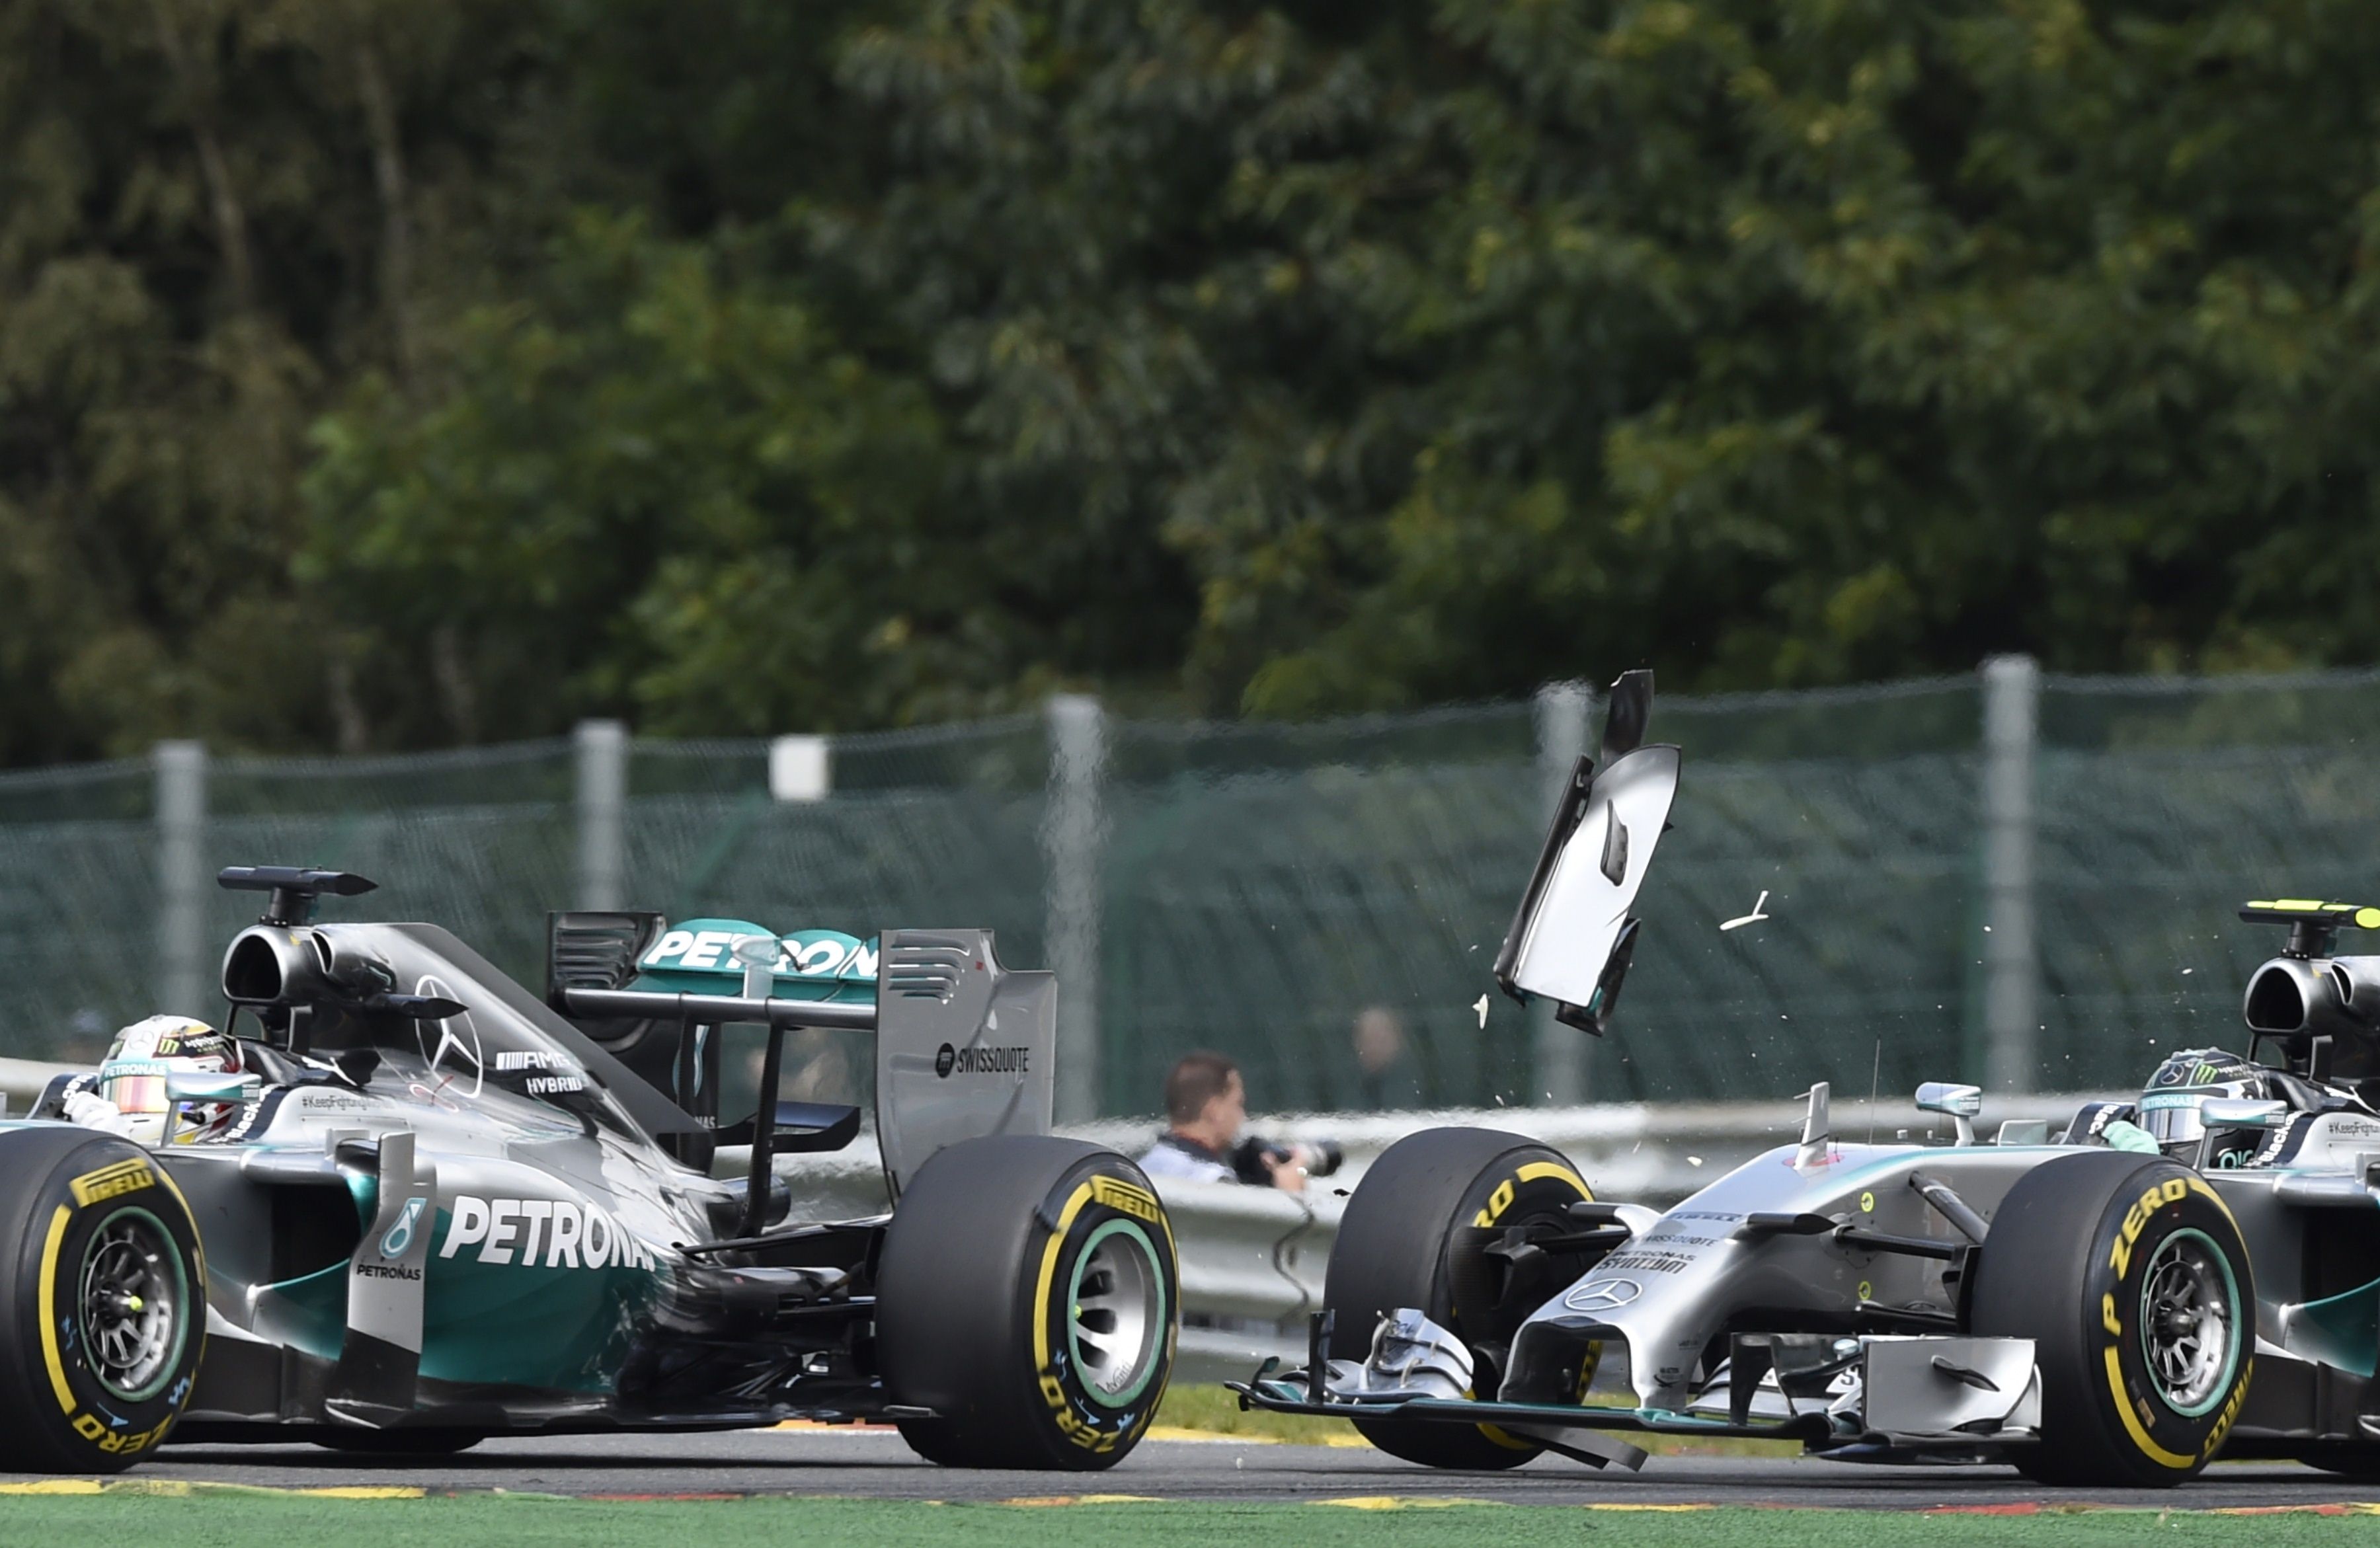 The simmering tension between Nico Rosberg and Lewis Hamilton spilled over into contact during the Belgium Grand Prix at the Spa-Francorchamps circuit. Rosberg accepted "responsibility" for the incident. Photo: AFP